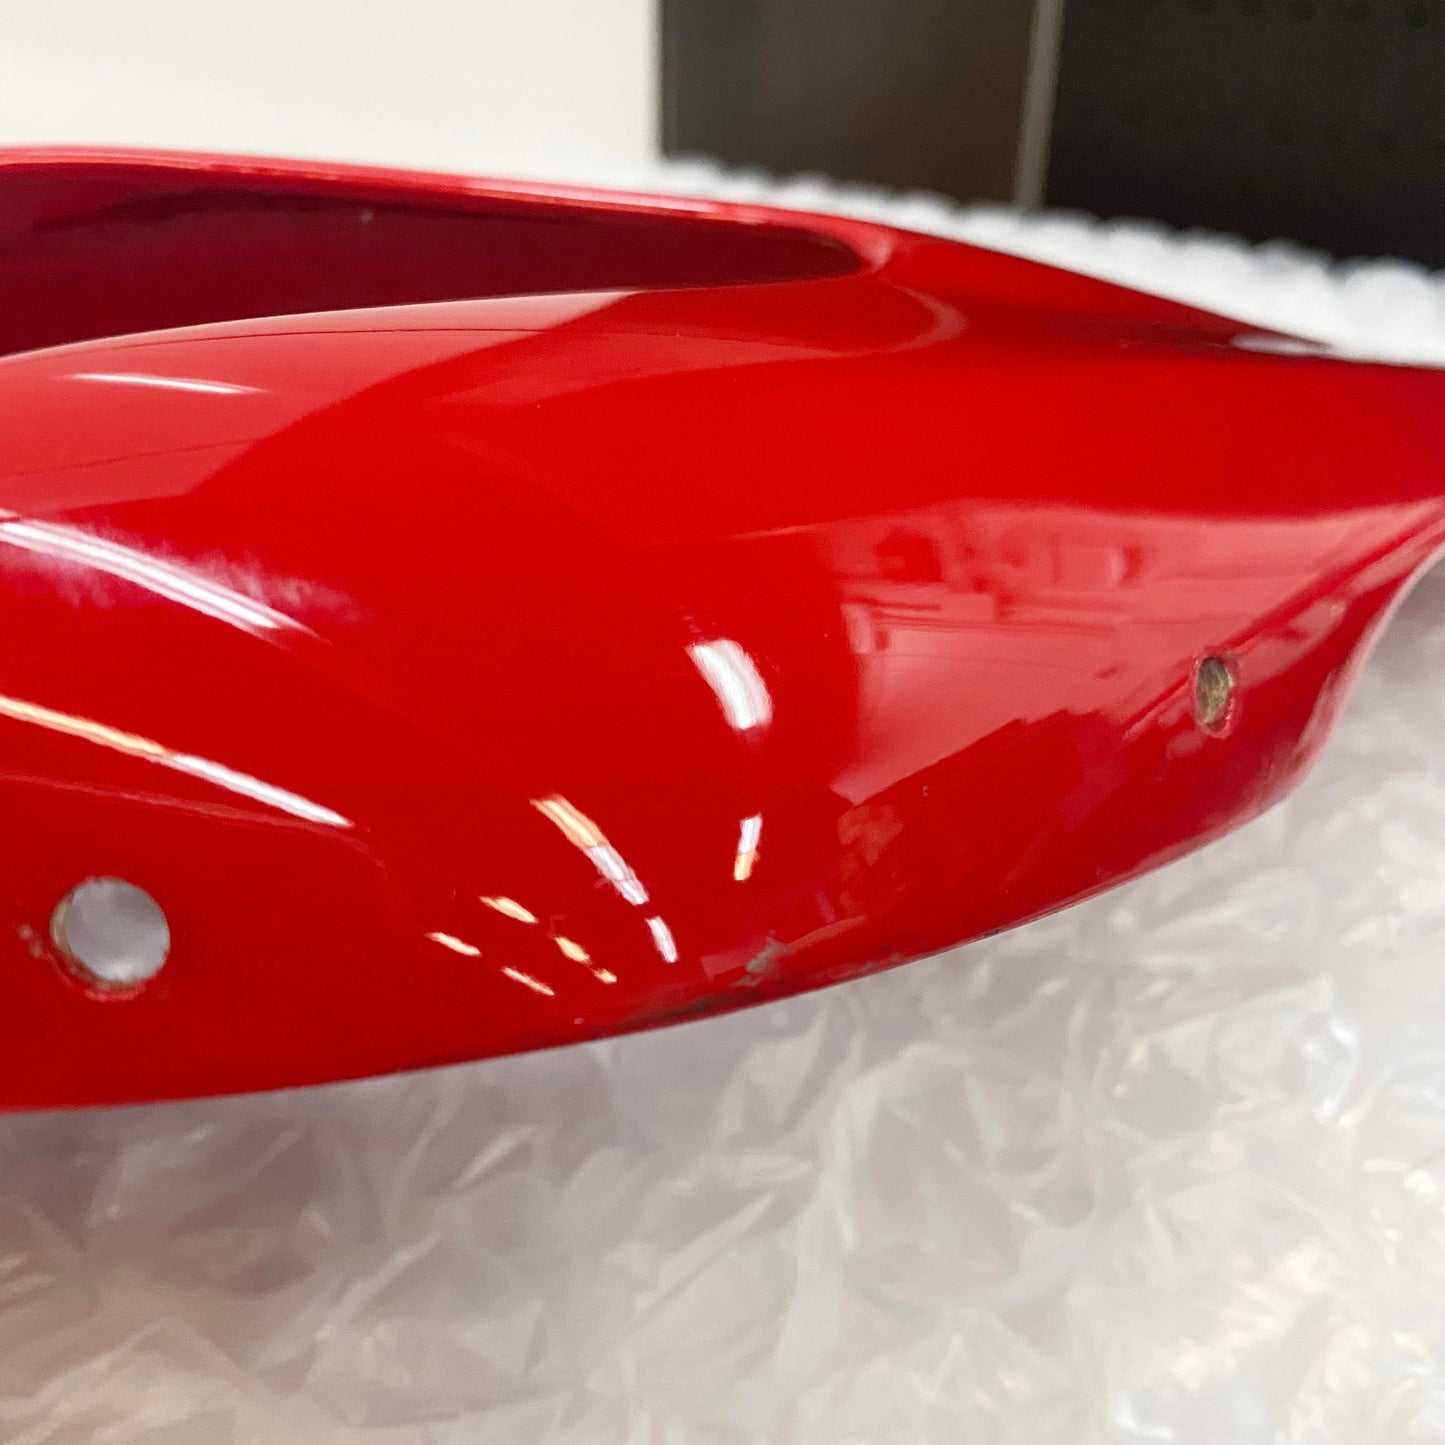 Ducati Supersport 900ss L/H Half Fairing, Red - 48010671AA Used